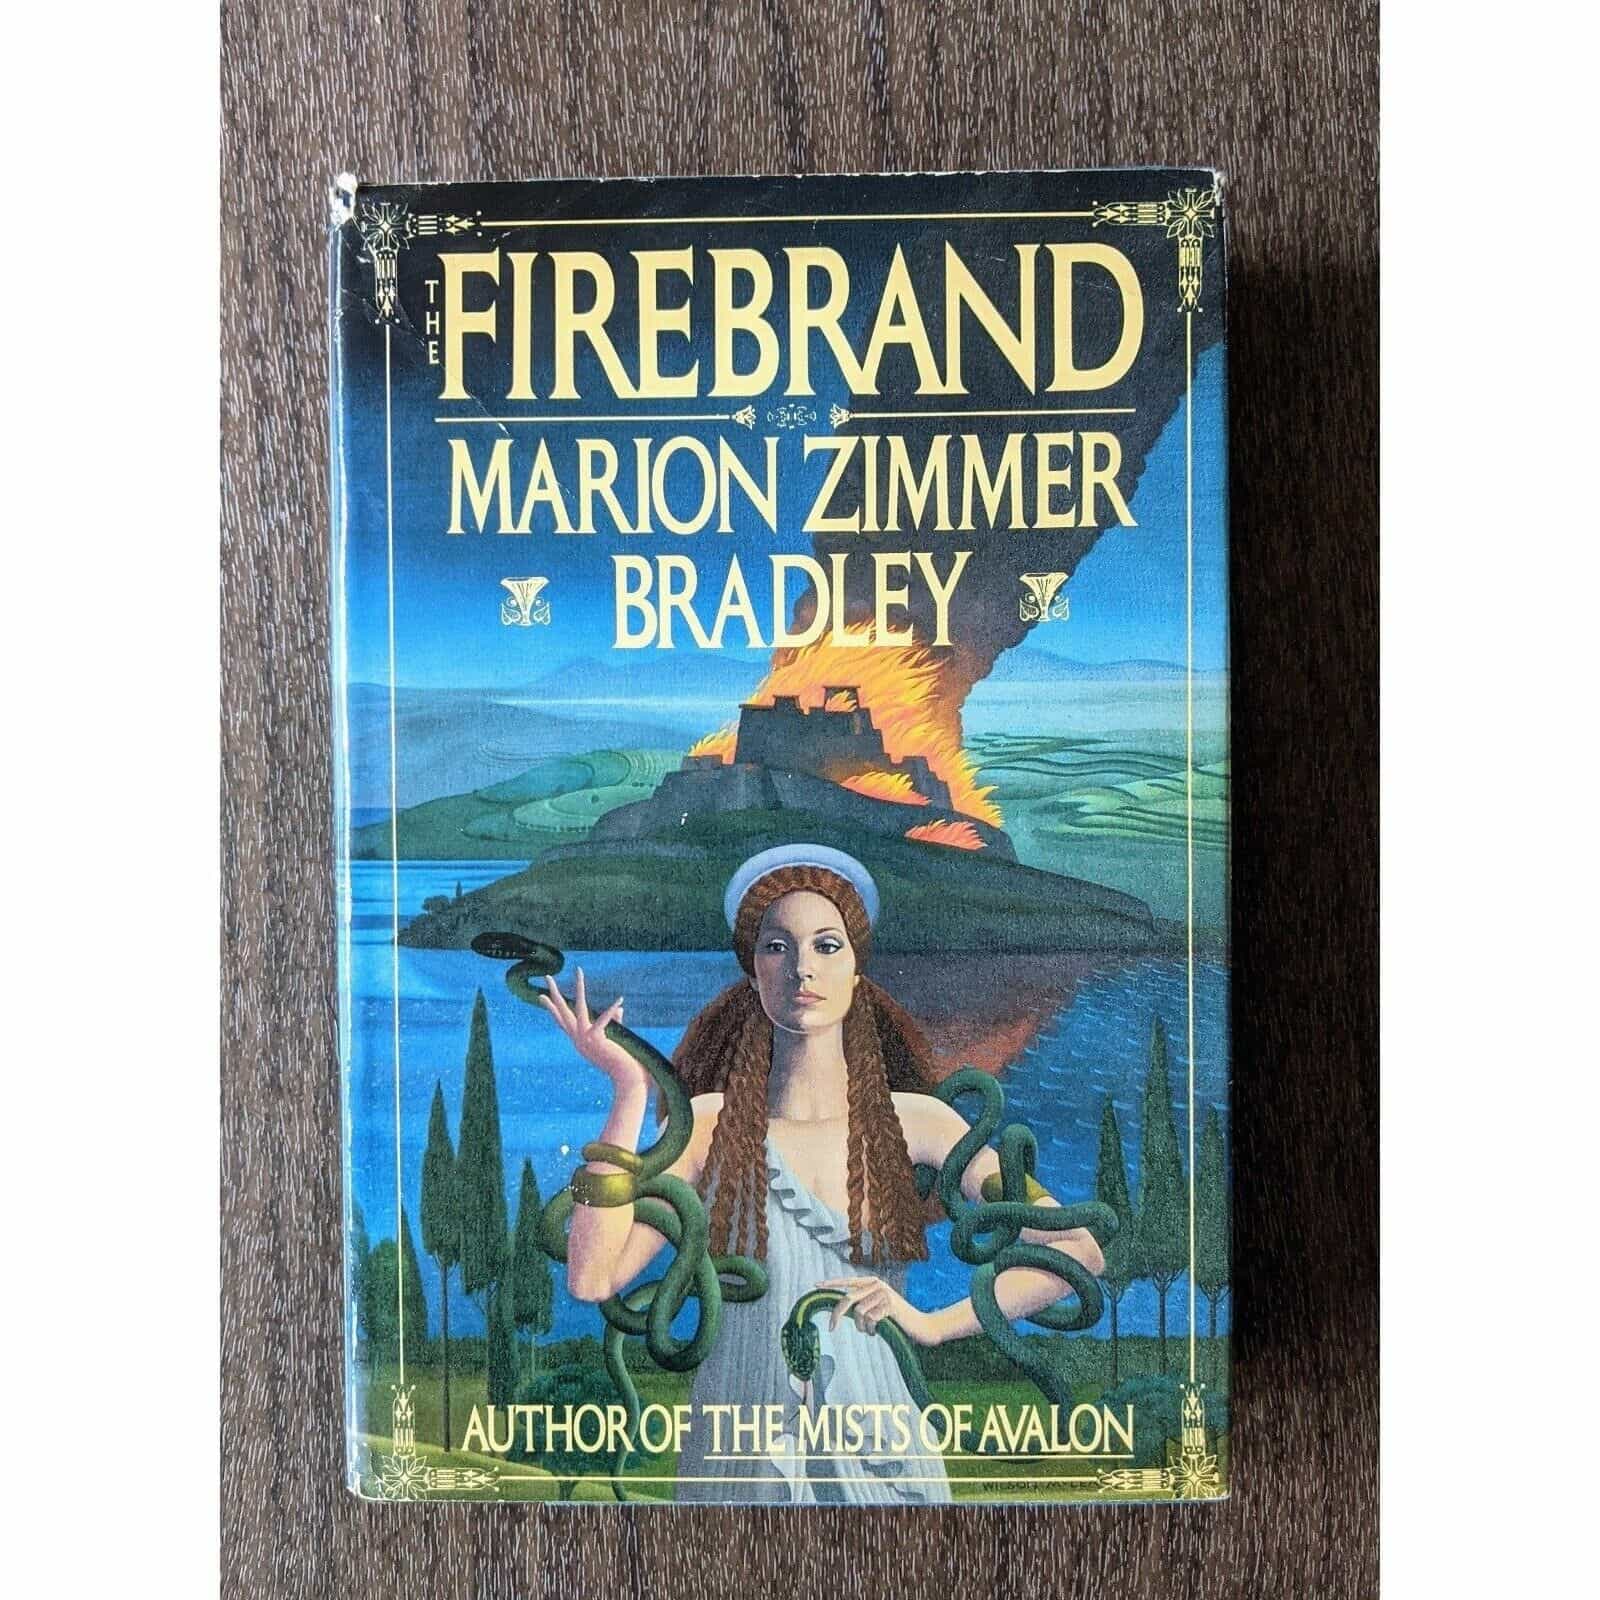 The Firebrand by Marion Zimmer Bradley Book